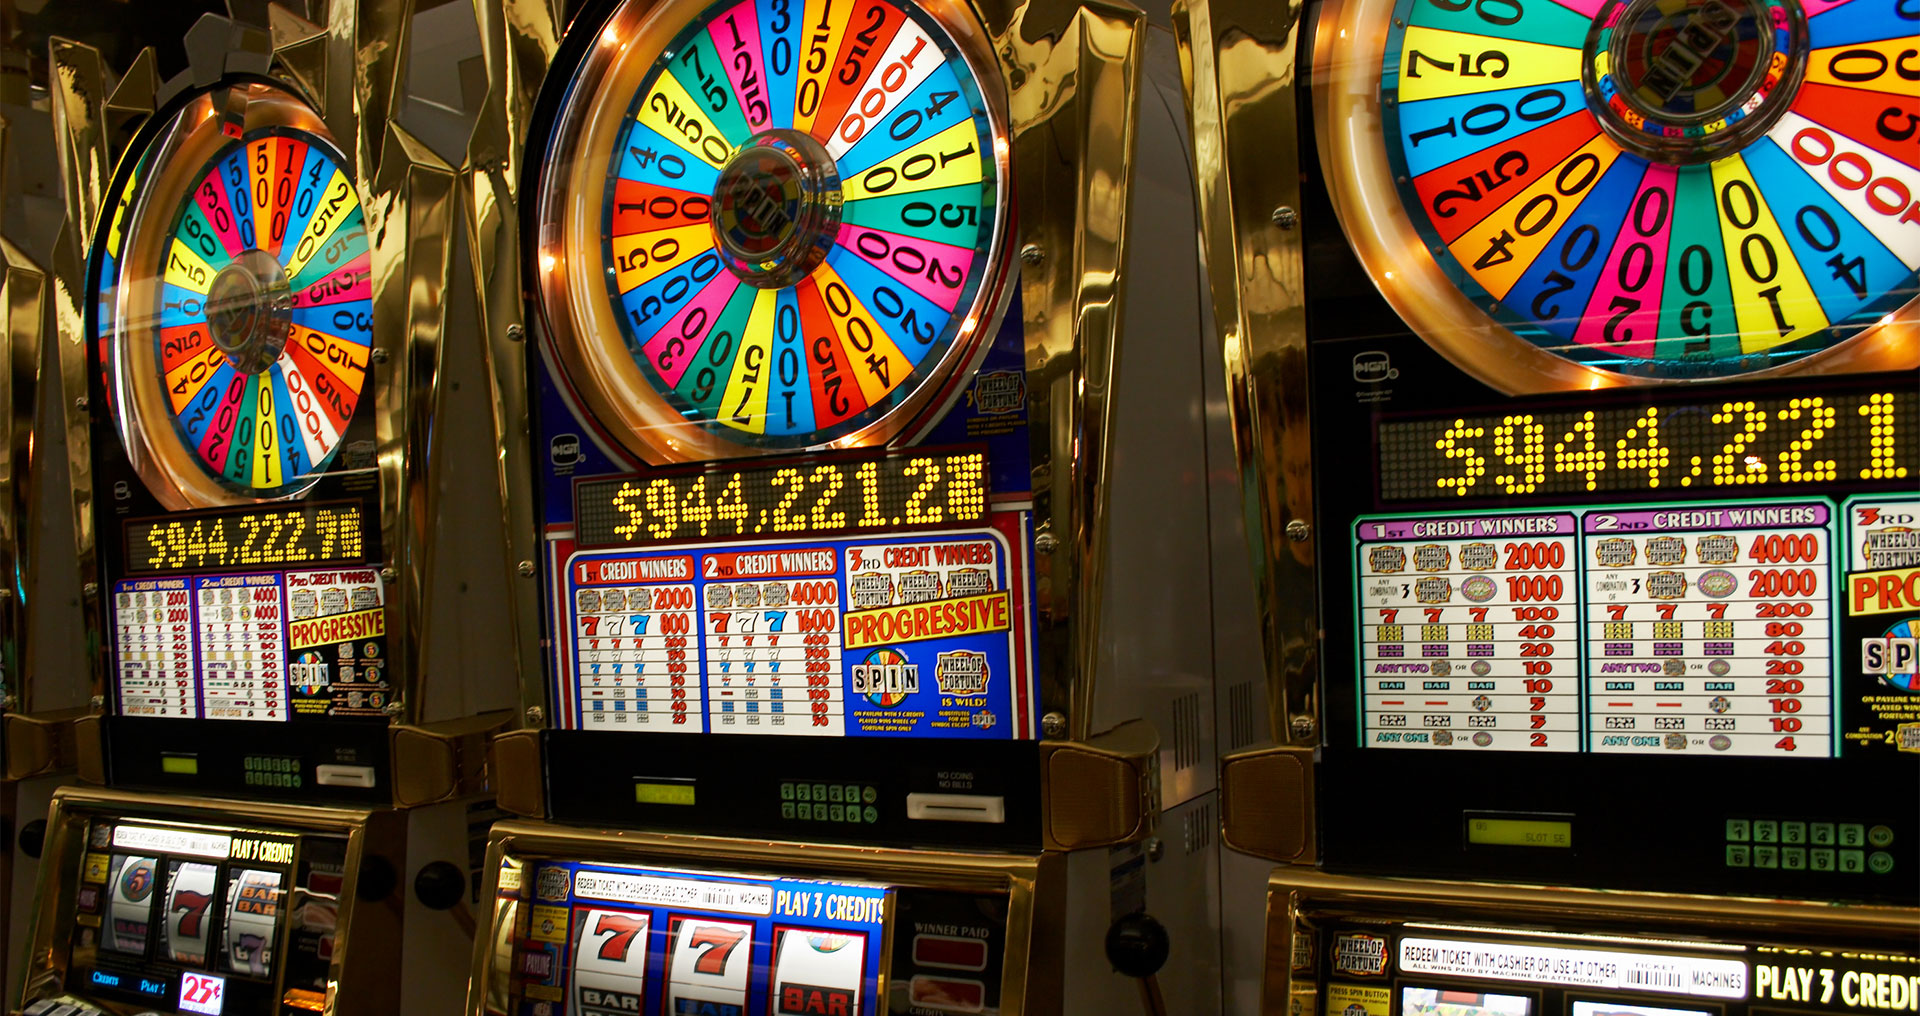 What Slot Machines Are The Best To Play